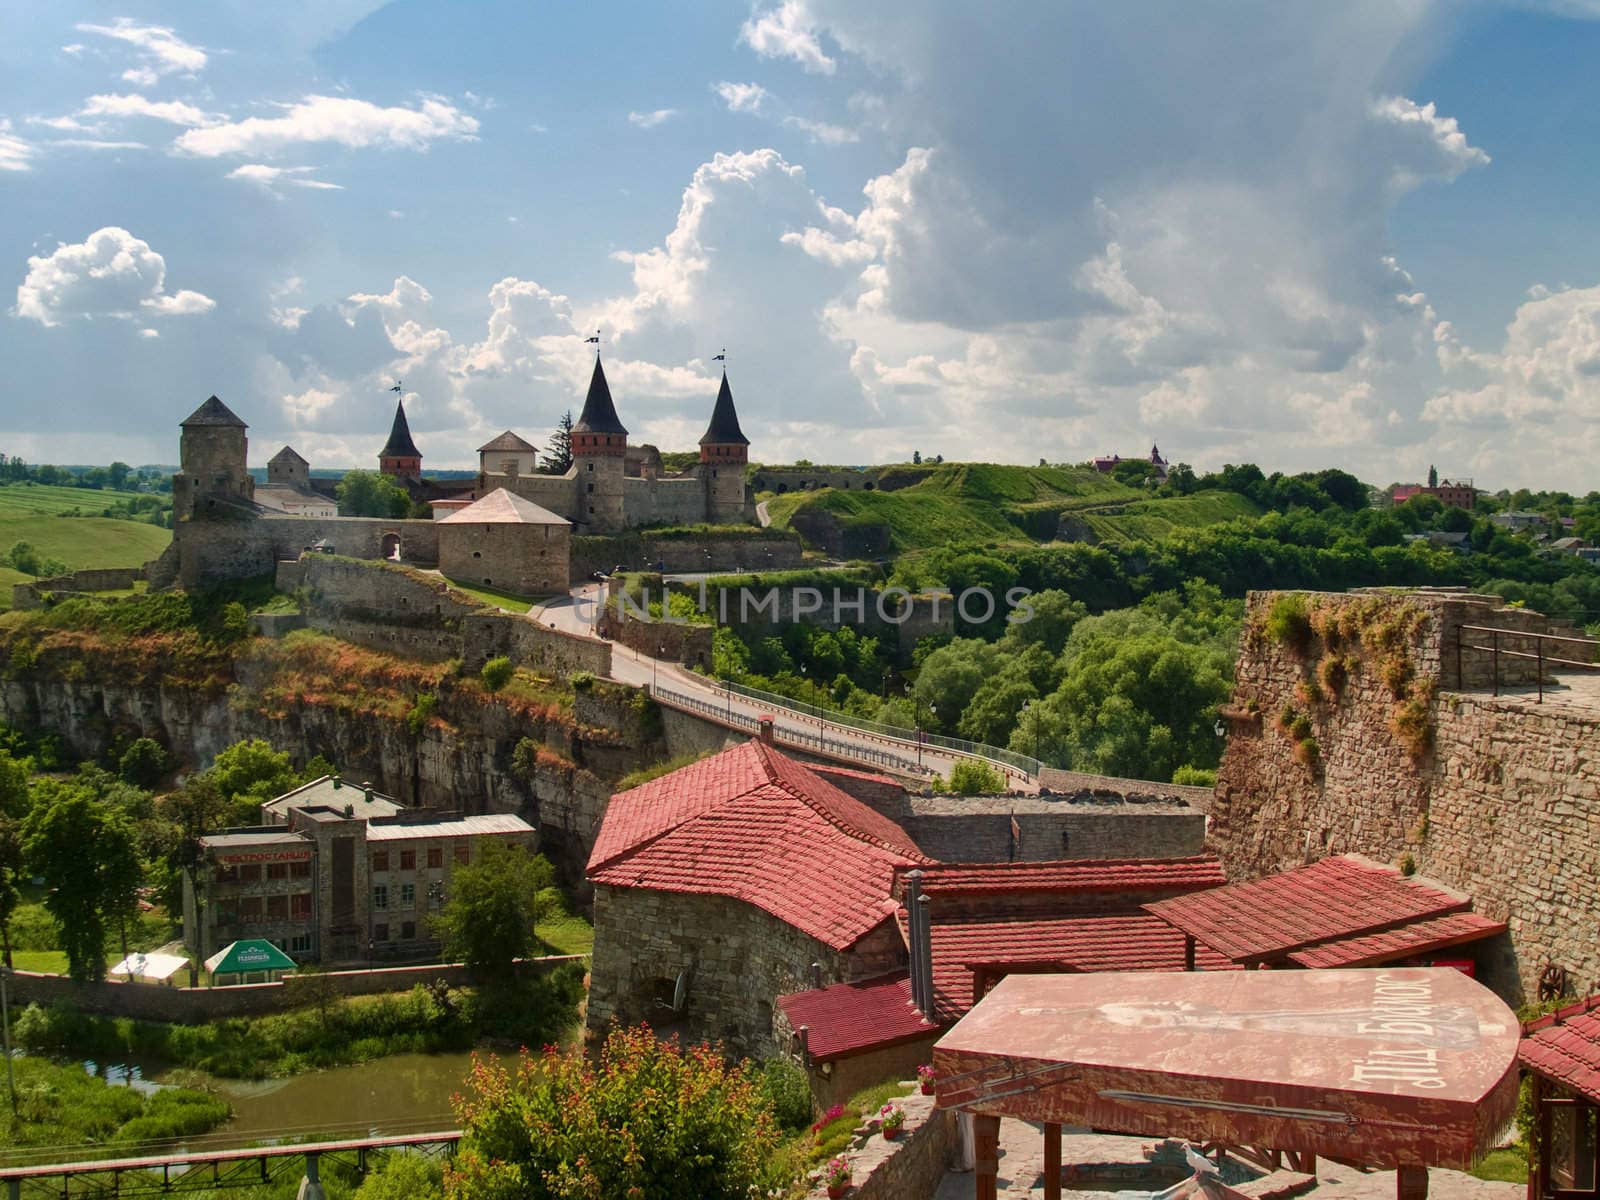 Old Polish castle in Ukrainian town Kamianets-Podilskyi